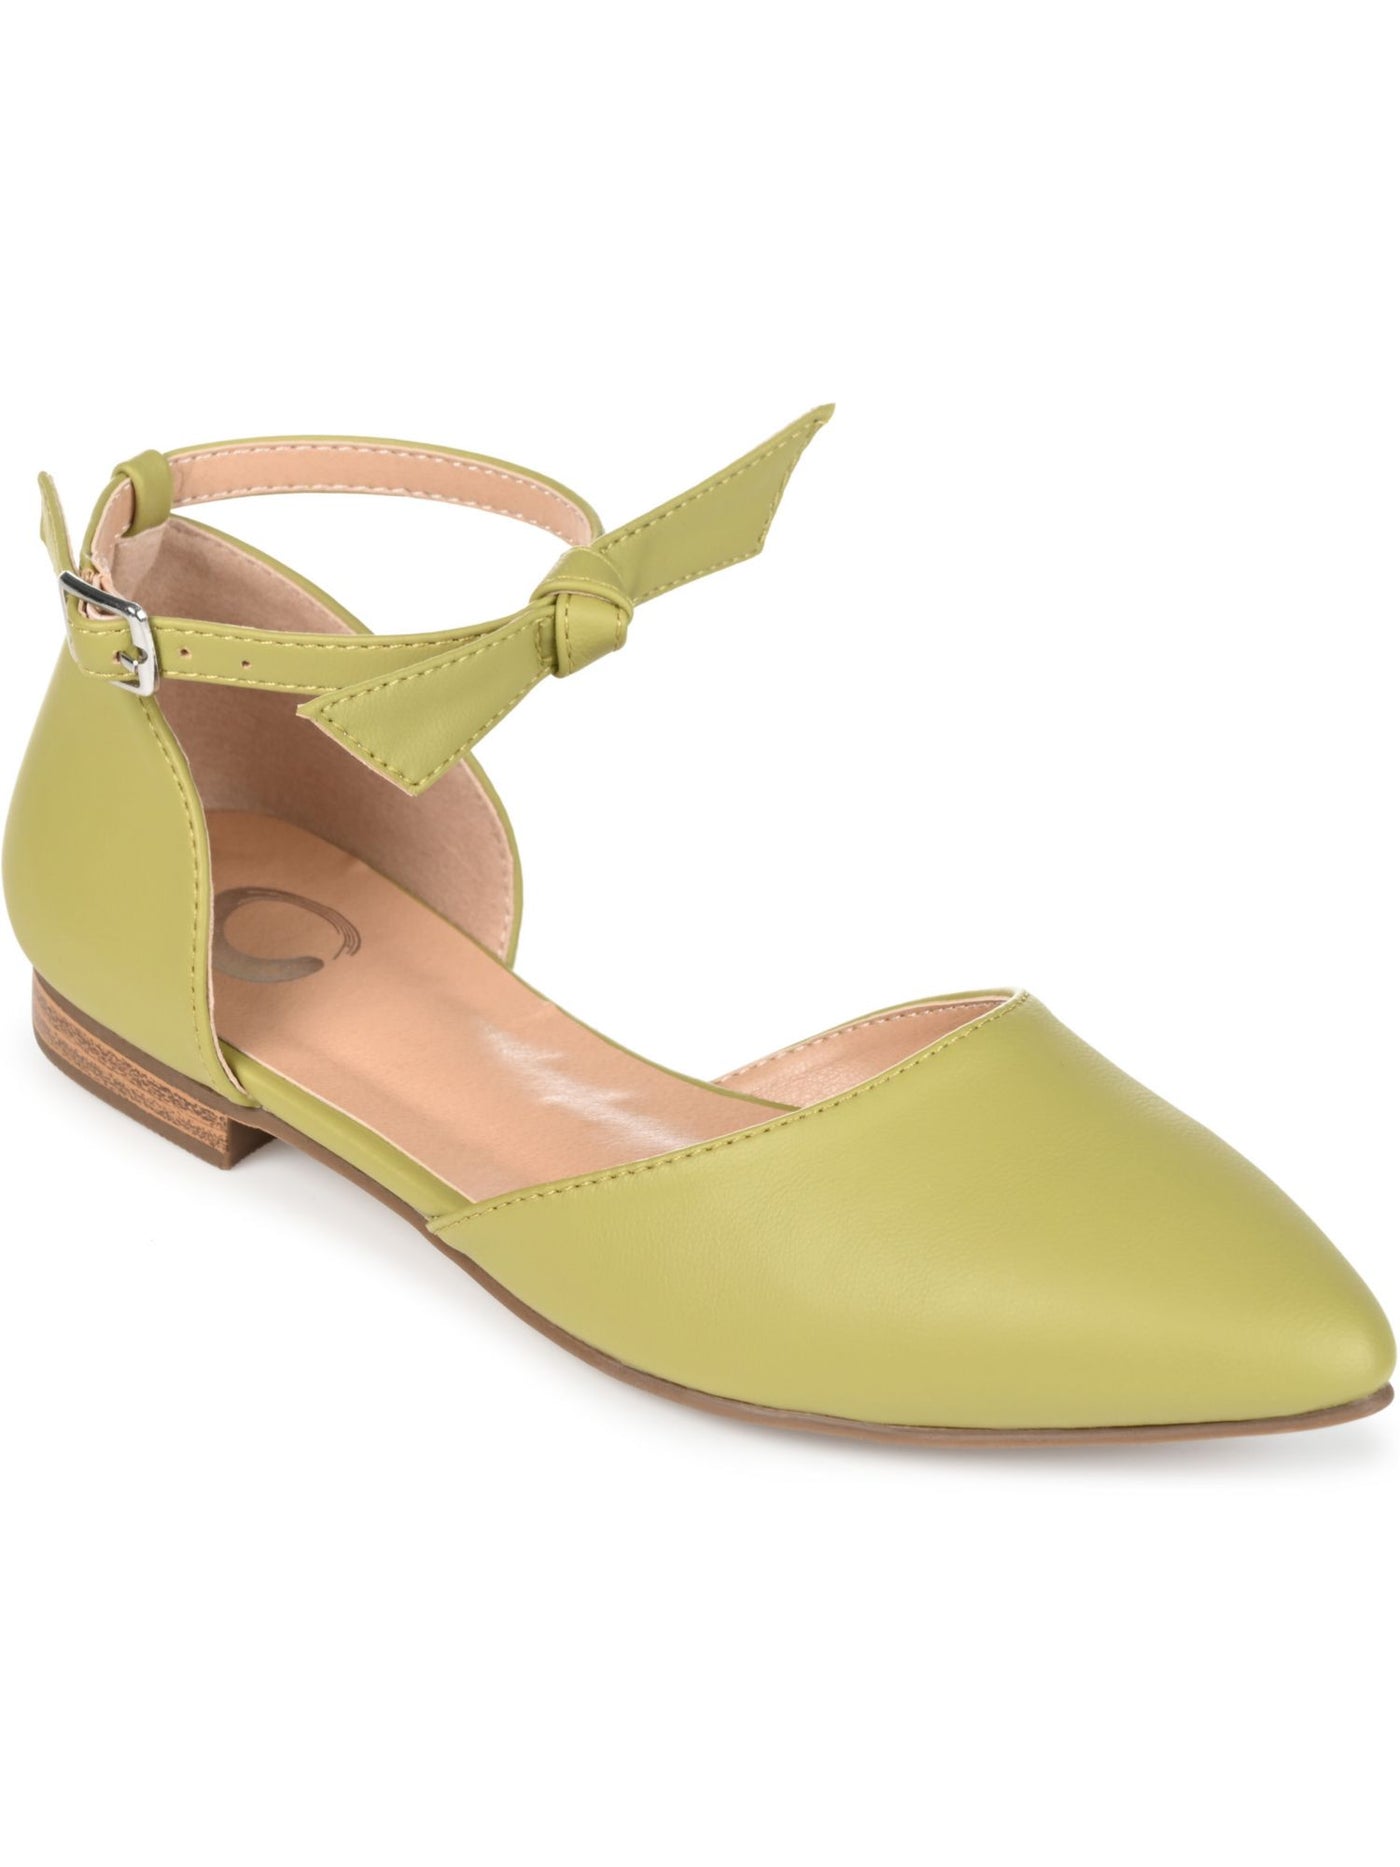 JOURNEE COLLECTION Womens Green D'orsay Ankle Strap Bow Accent Vielo Almond Toe Buckle Flats Shoes 9